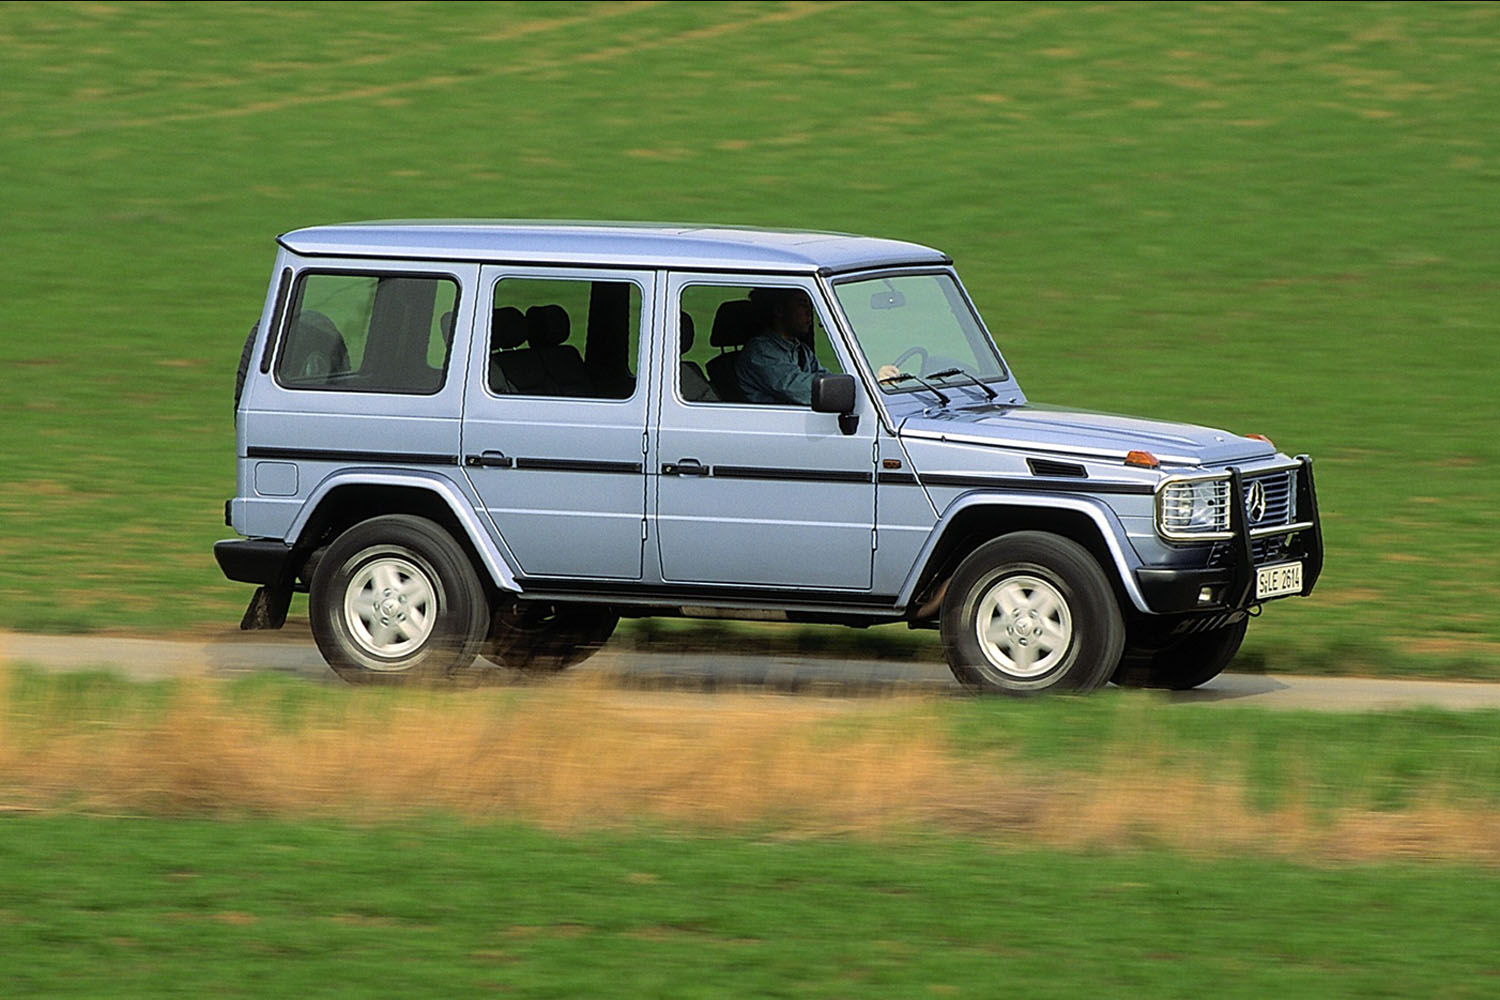 Review: How I Learned to Stop Worrying and Love the Mercedes G-Wagen